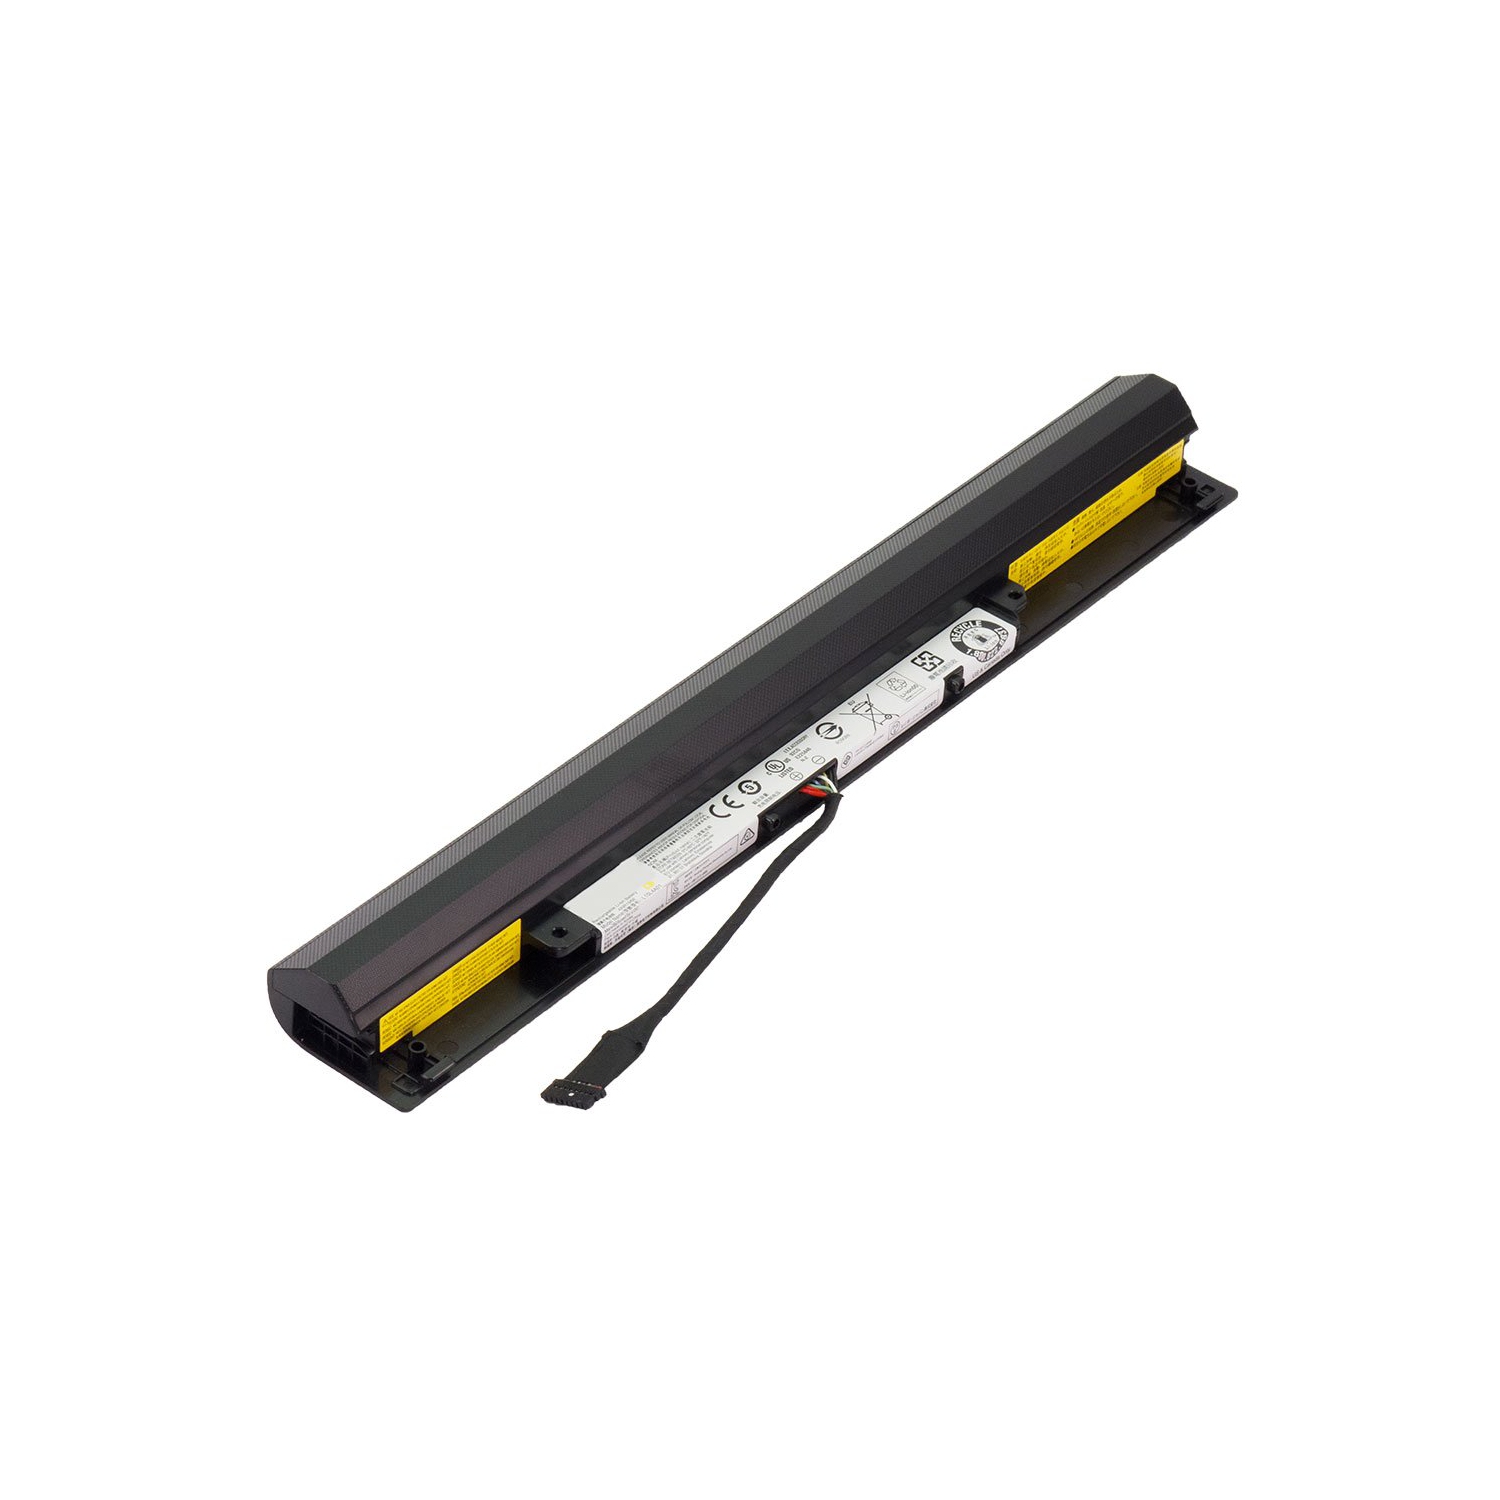 Laptop Battery Replacement for Lenovo IdeaPad 100-15IBD 80MJ00CKGE, 41NR19/65, L15L4A01